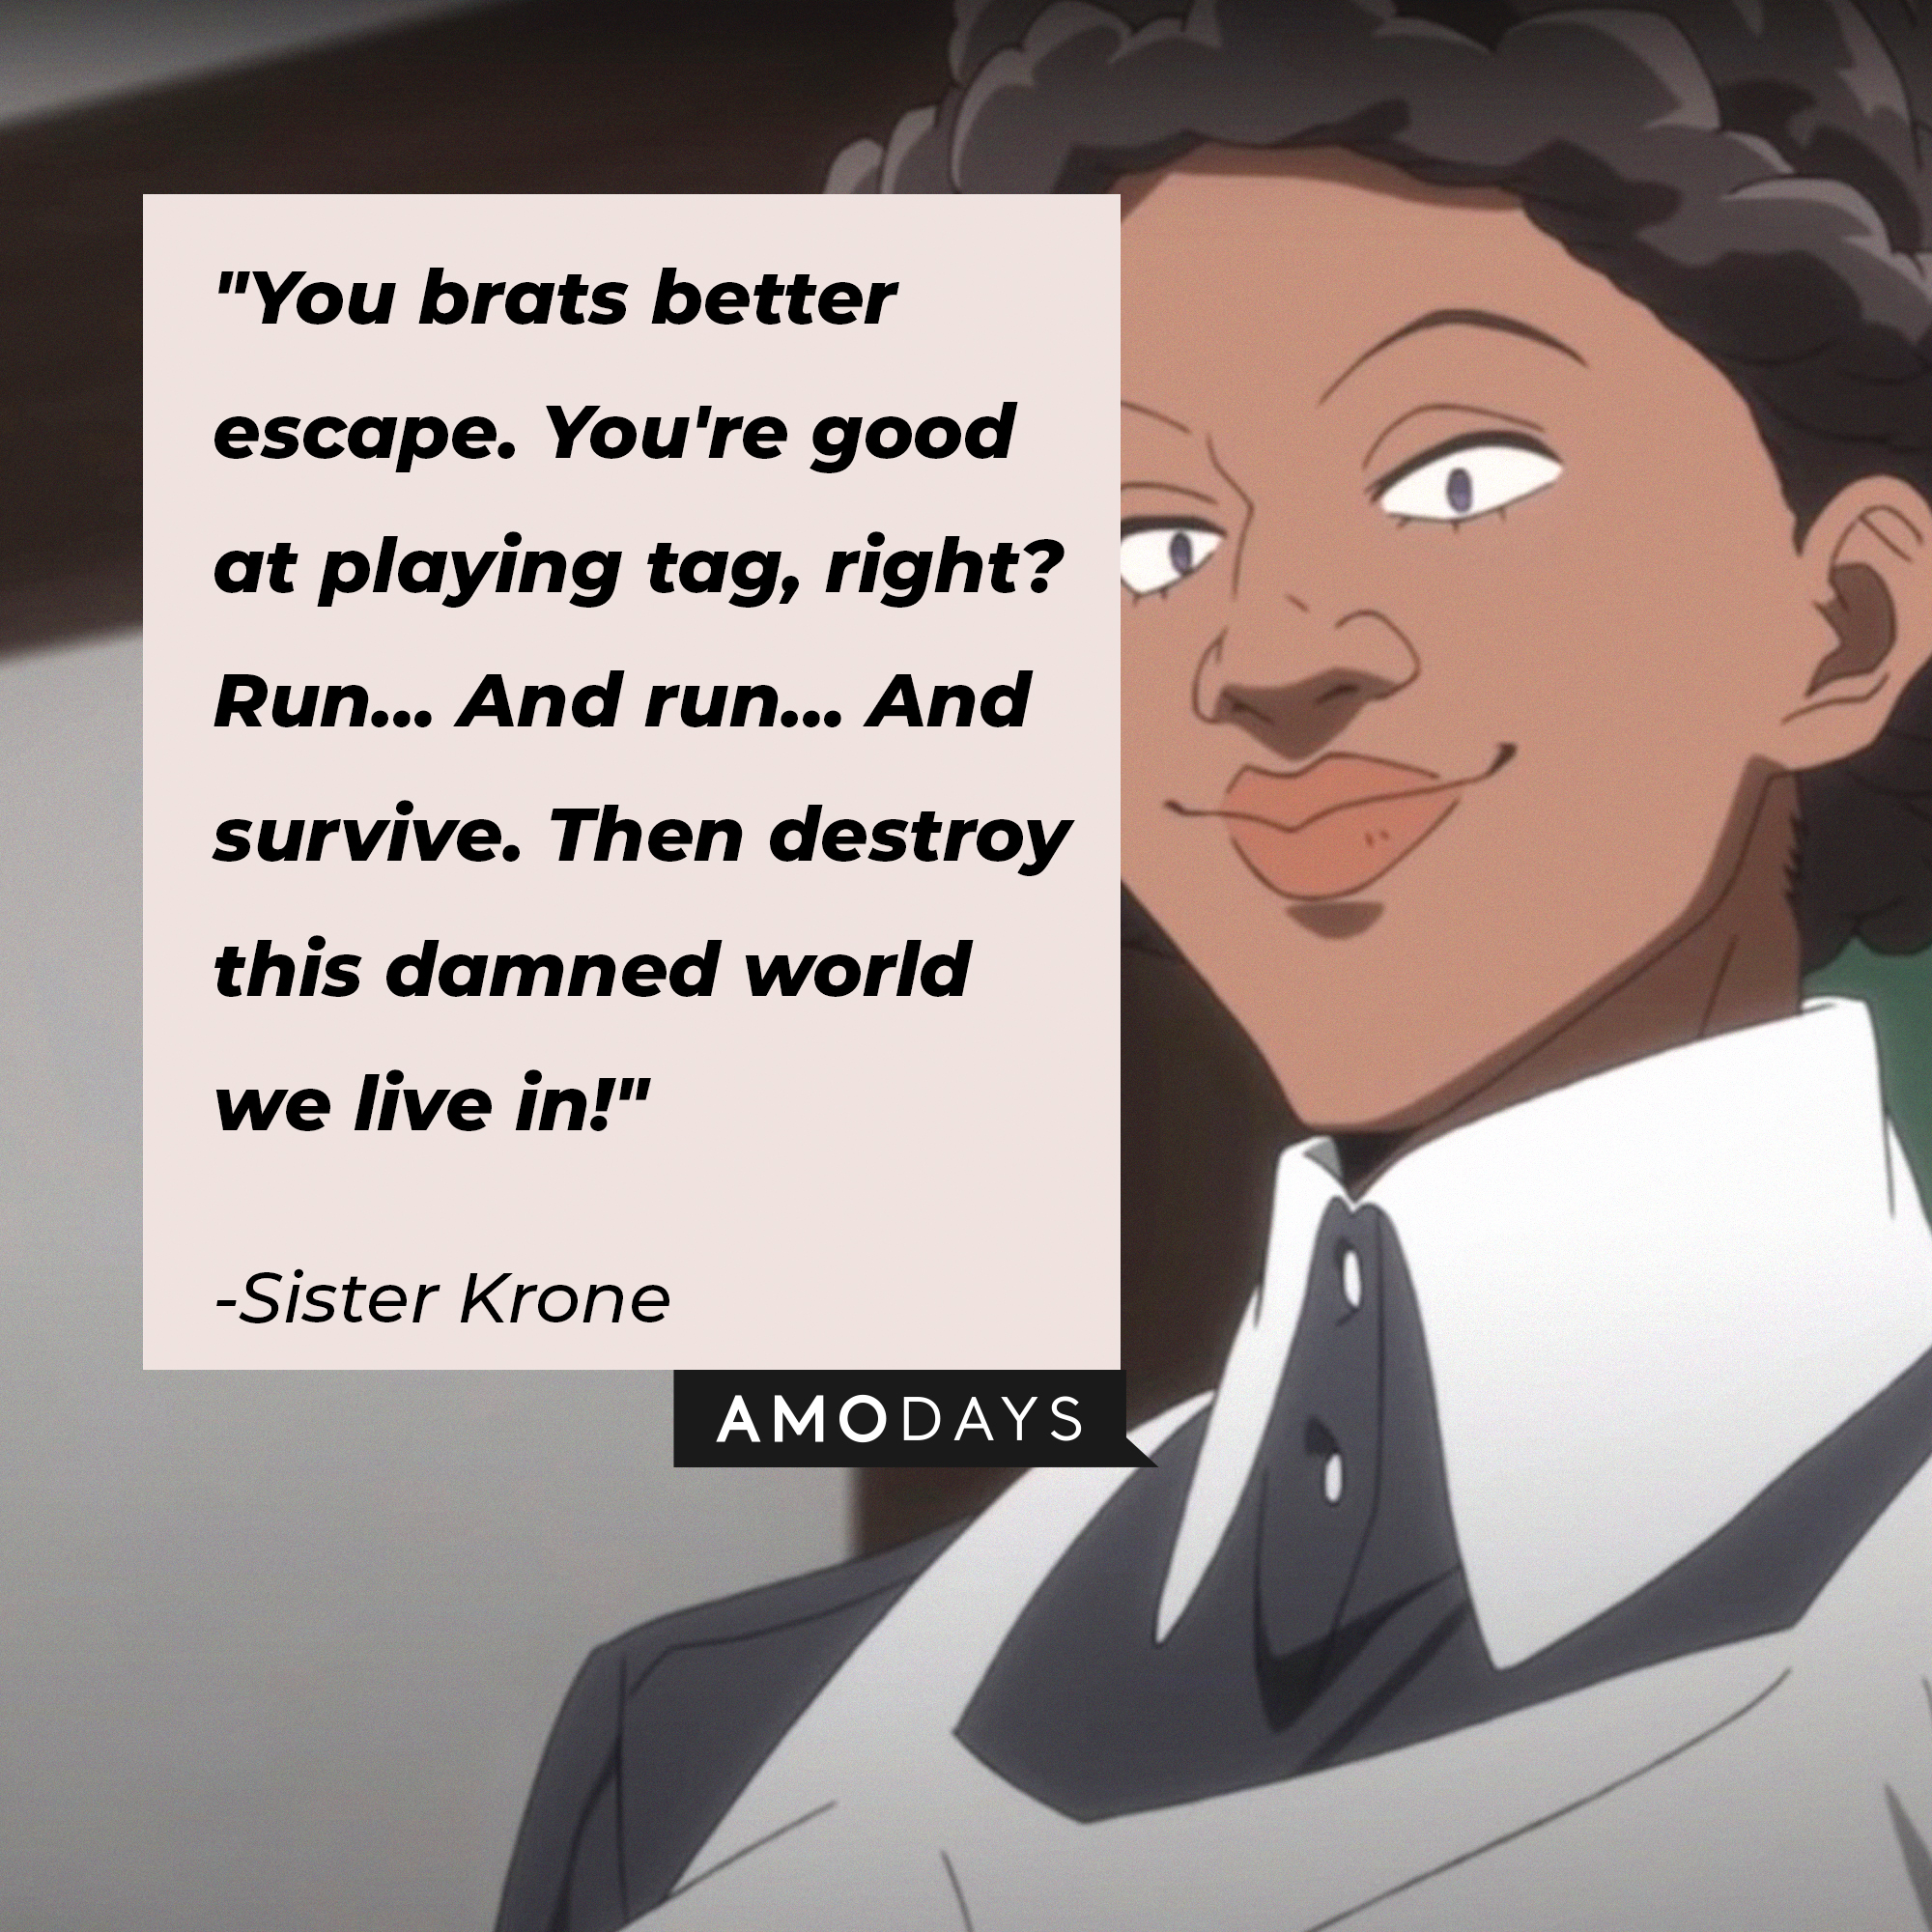 Sister Krone's quote: "You brats better escape. You're good at playing tag, right? Run… And run… And survive. Then destroy this damned world we live in!" | Image: AmoDays